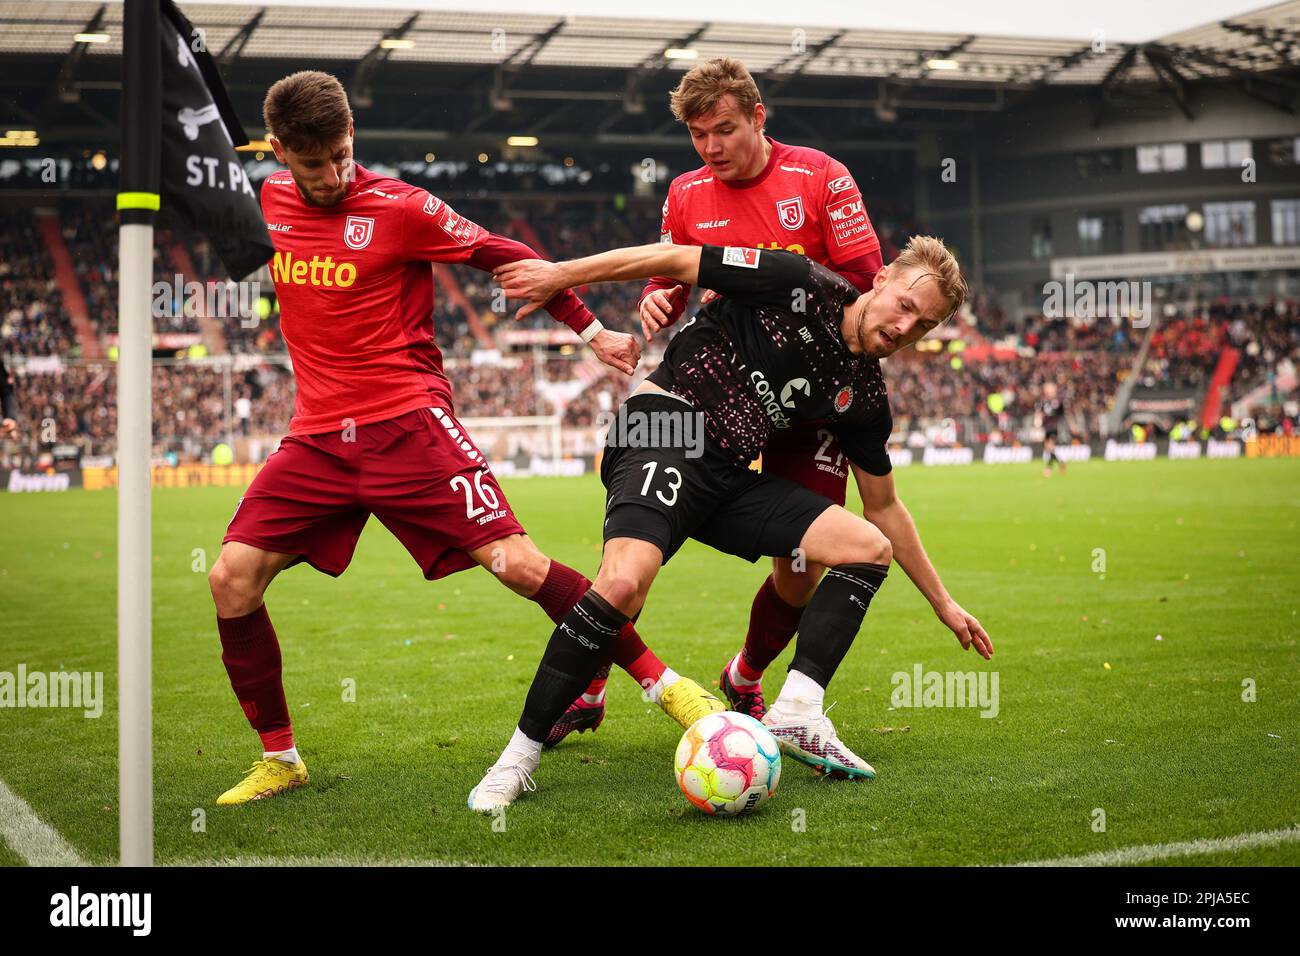 Hamburg, Germany. 01st Apr, 2023. Soccer: 2nd Bundesliga, Matchday 26, FC St. Pauli - Jahn Regensburg at Millerntor Stadium. St. Pauli's Lukas Daschner (center) battles for the ball with Regensburg's Charalambos Makridis (left) and Lasse Günther. Credit: Christian Charisius/dpa - IMPORTANT NOTE: In accordance with the requirements of the DFL Deutsche Fußball Liga and the DFB Deutscher Fußball-Bund, it is prohibited to use or have used photographs taken in the stadium and/or of the match in the form of sequence pictures and/or video-like photo series./dpa/Alamy Live News Stock Photo